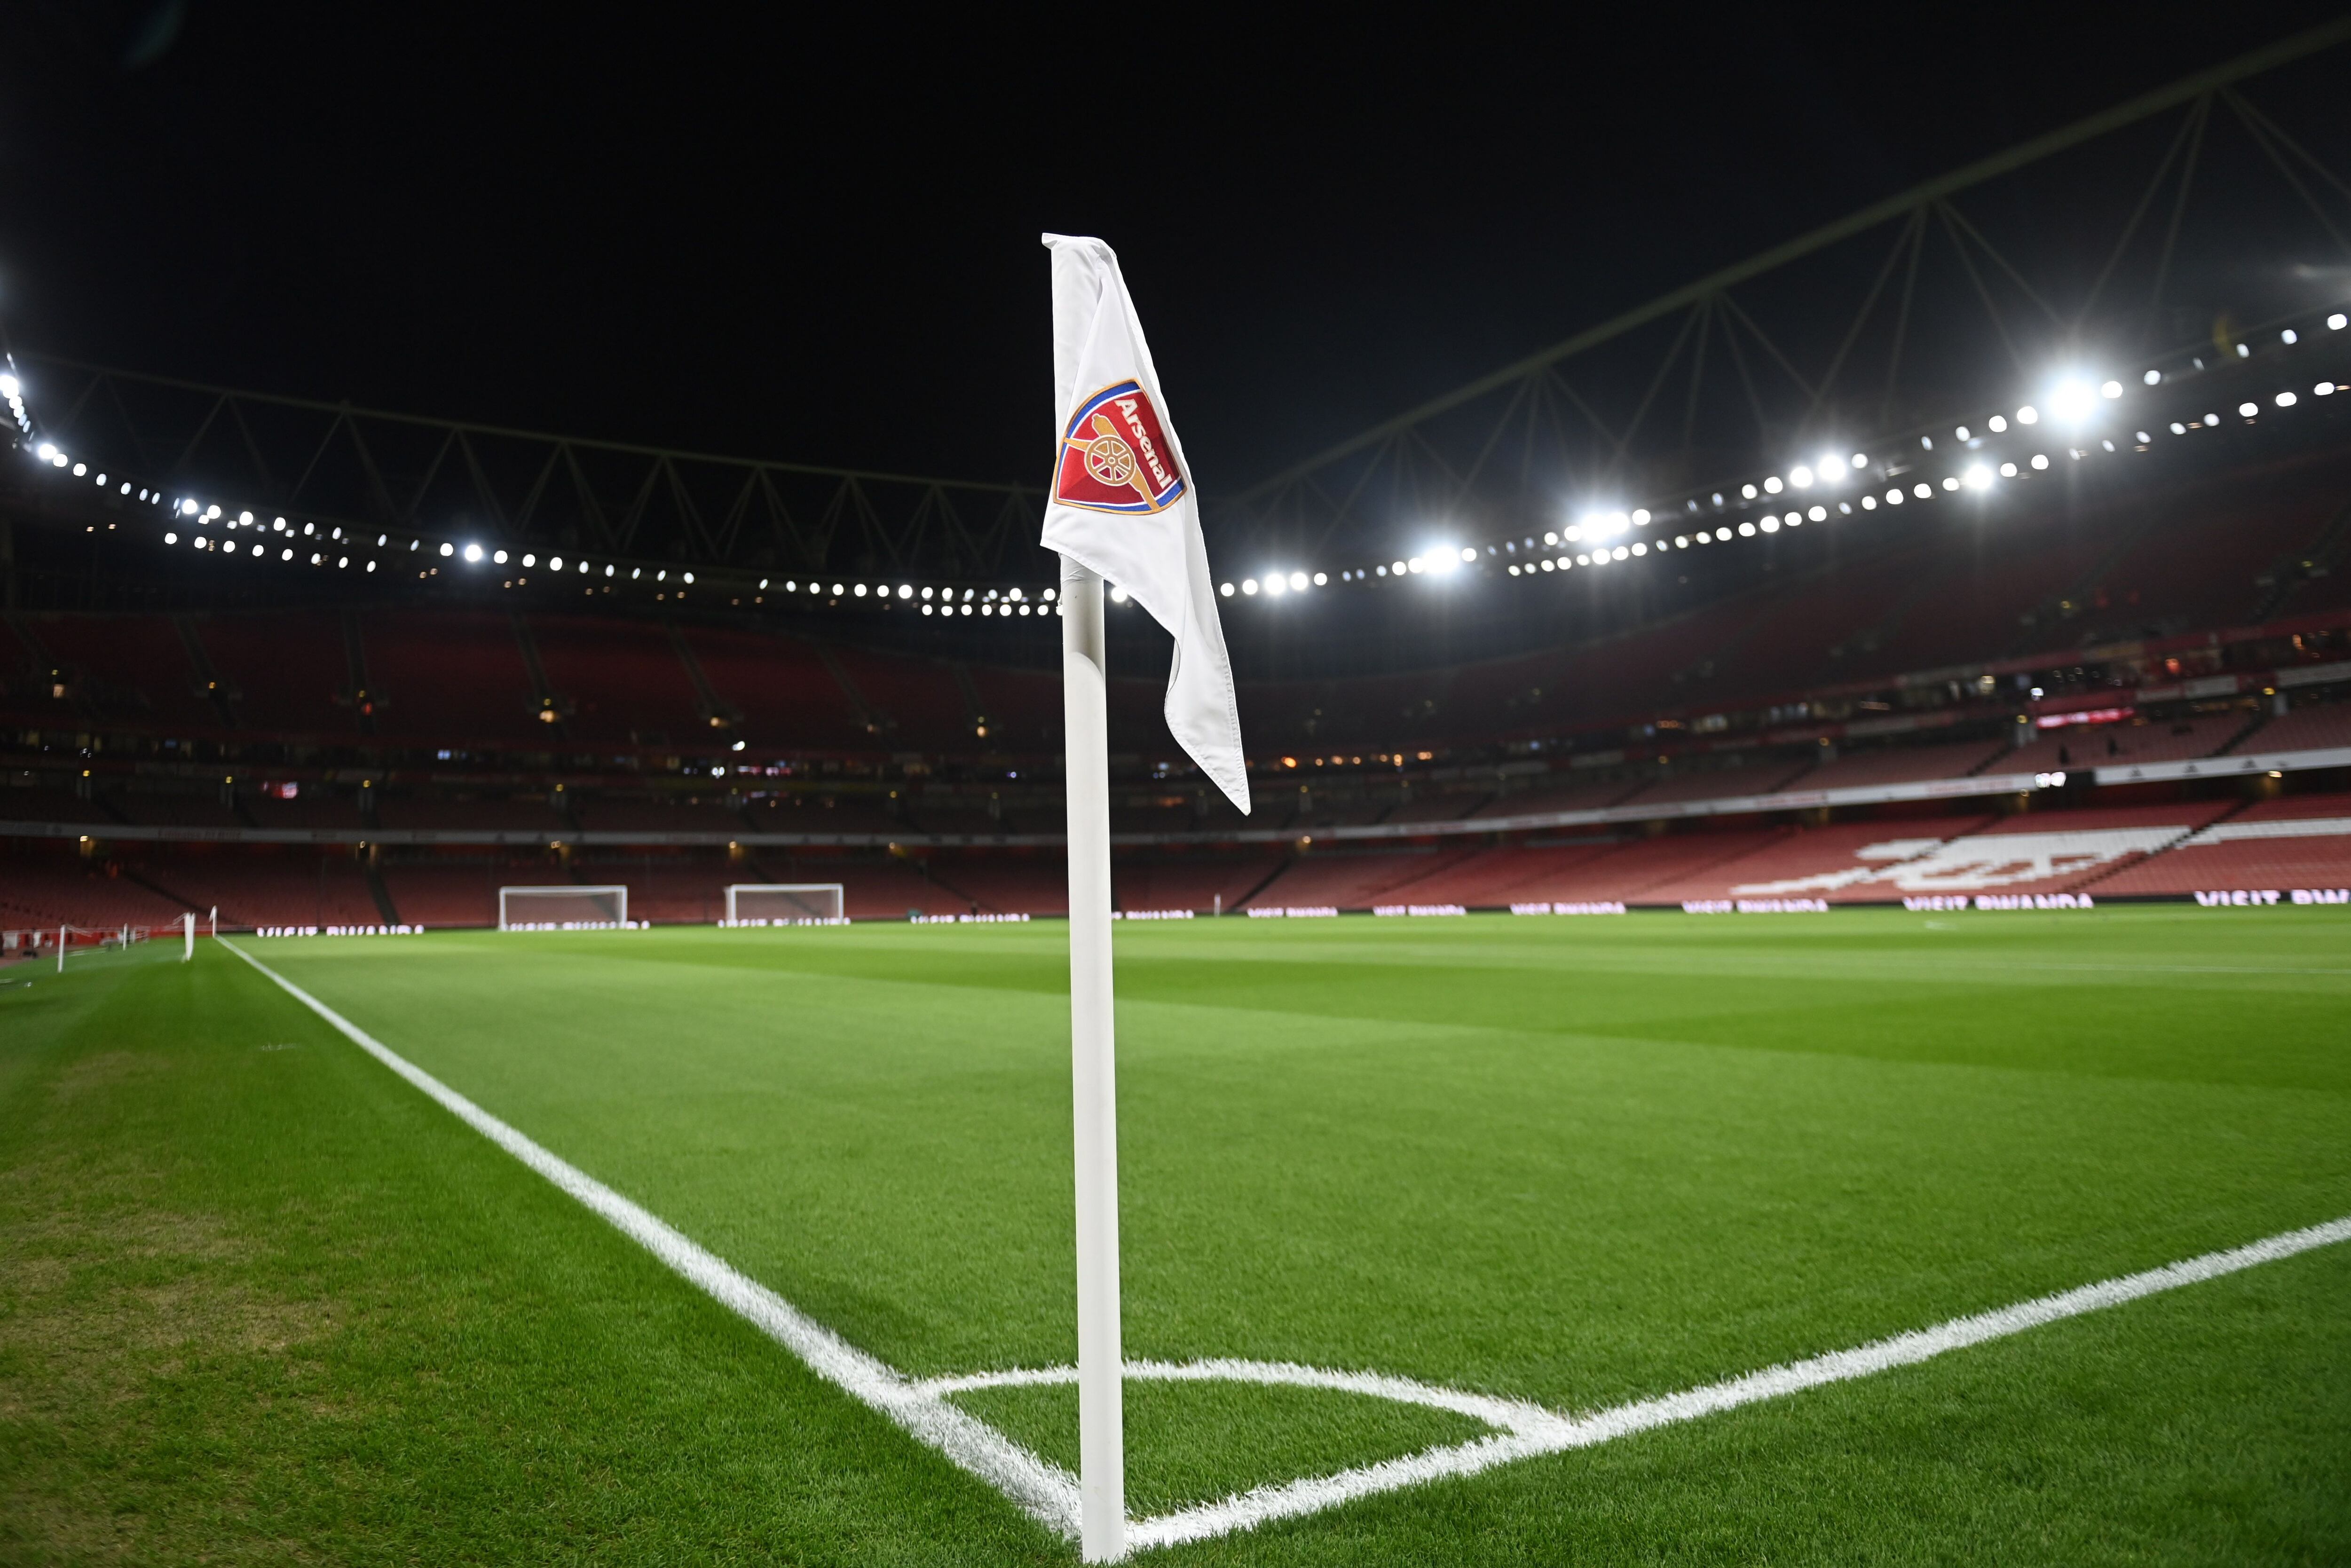 London (United Kingdom), 26/12/2022.- The corner flag at the Emirates Stadium ahead of the English Premier League soccer match between Arsenal Football Club and West Ham United in London, Britain, 26 December 2022. (Reino Unido, Londres) EFE/EPA/Neil Hall EDITORIAL USE ONLY. No use with unauthorized audio, video, data, fixture lists, club/league logos or 'live' services. Online in-match use limited to 120 images, no video emulation. No use in betting, games or single club/league/player publications
